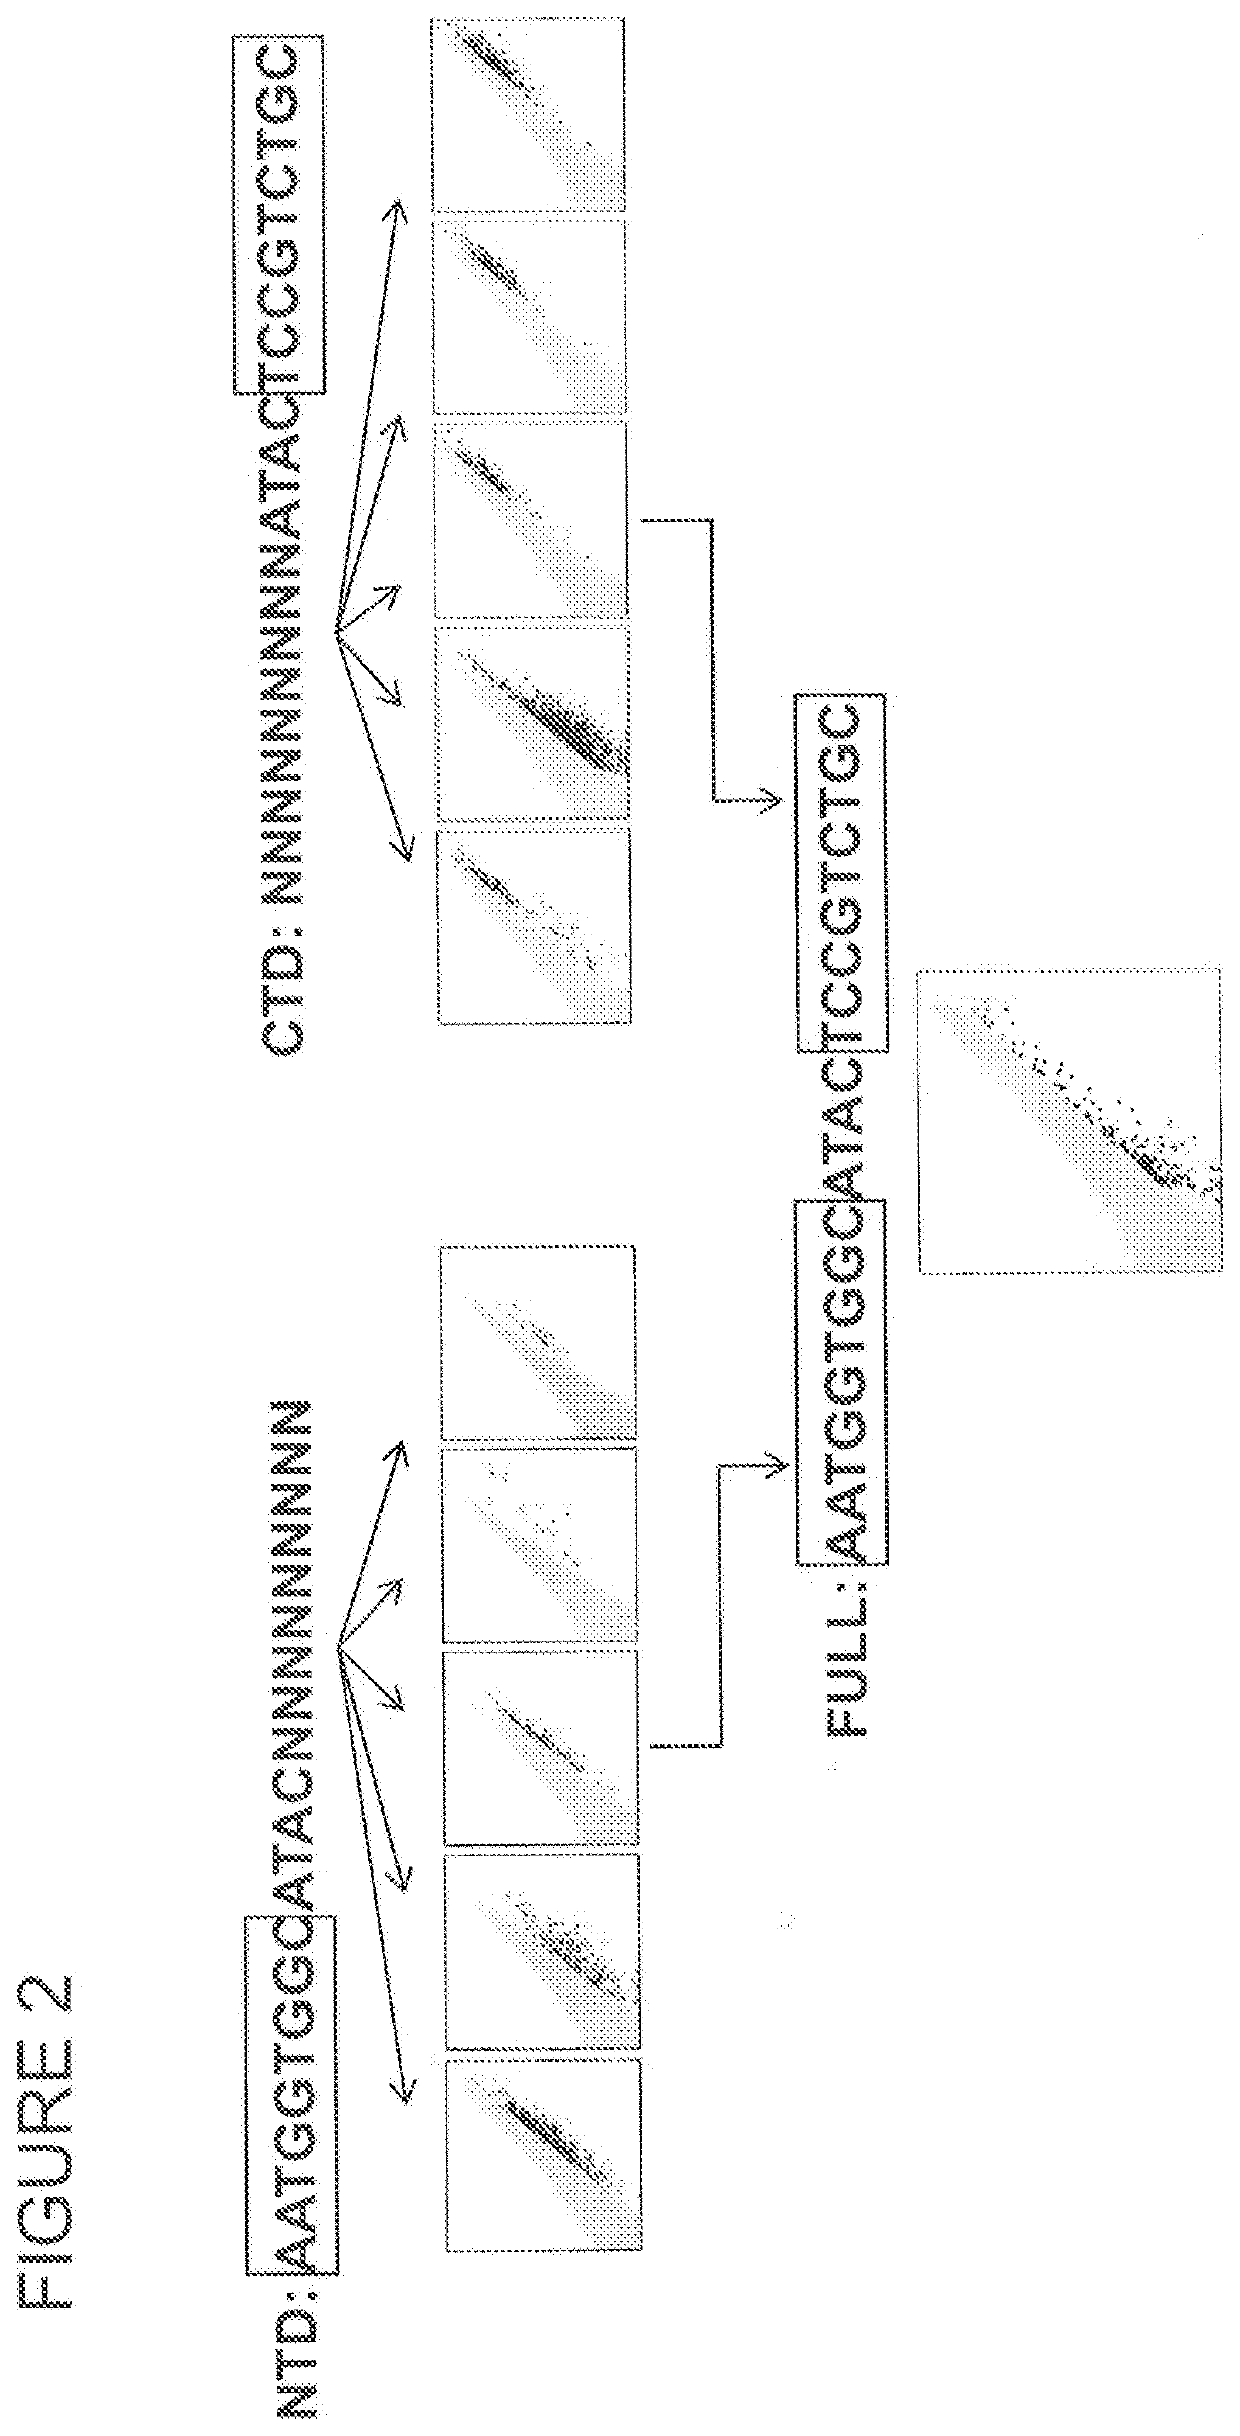 Pd-1 homing endonuclease variants, compositions, and methods of use